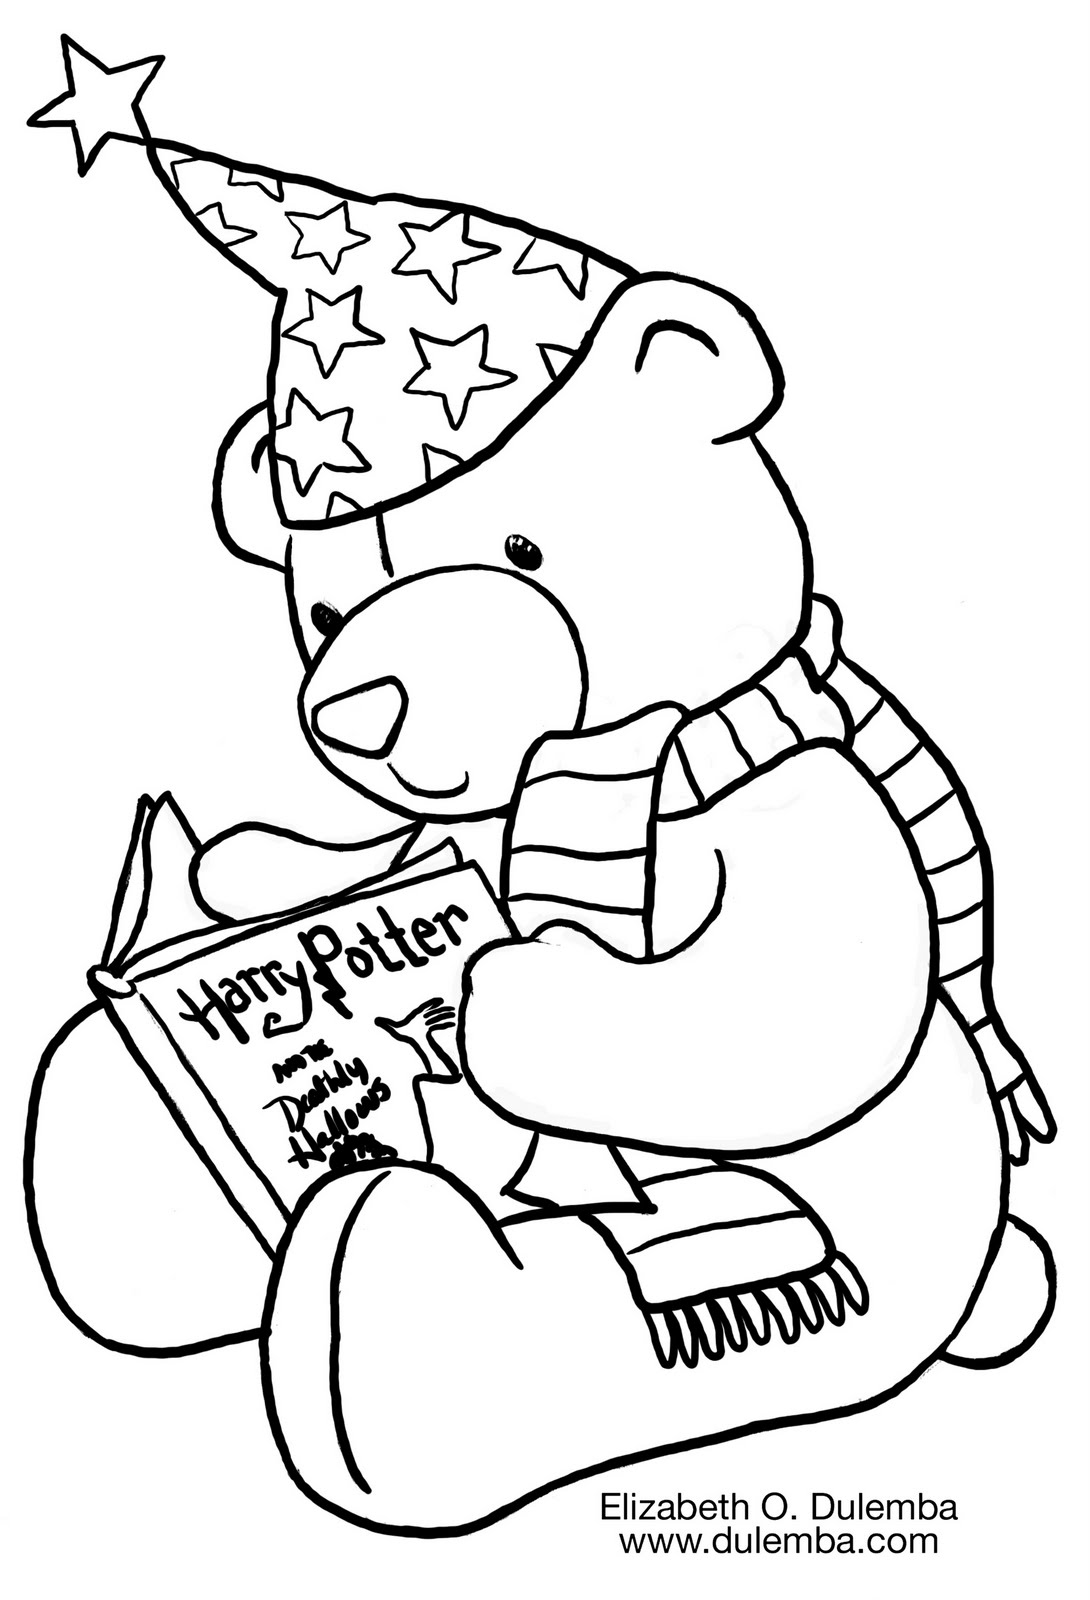 Download Coloring & Activity Pages: Harry Potter Teddy Bear Coloring Page